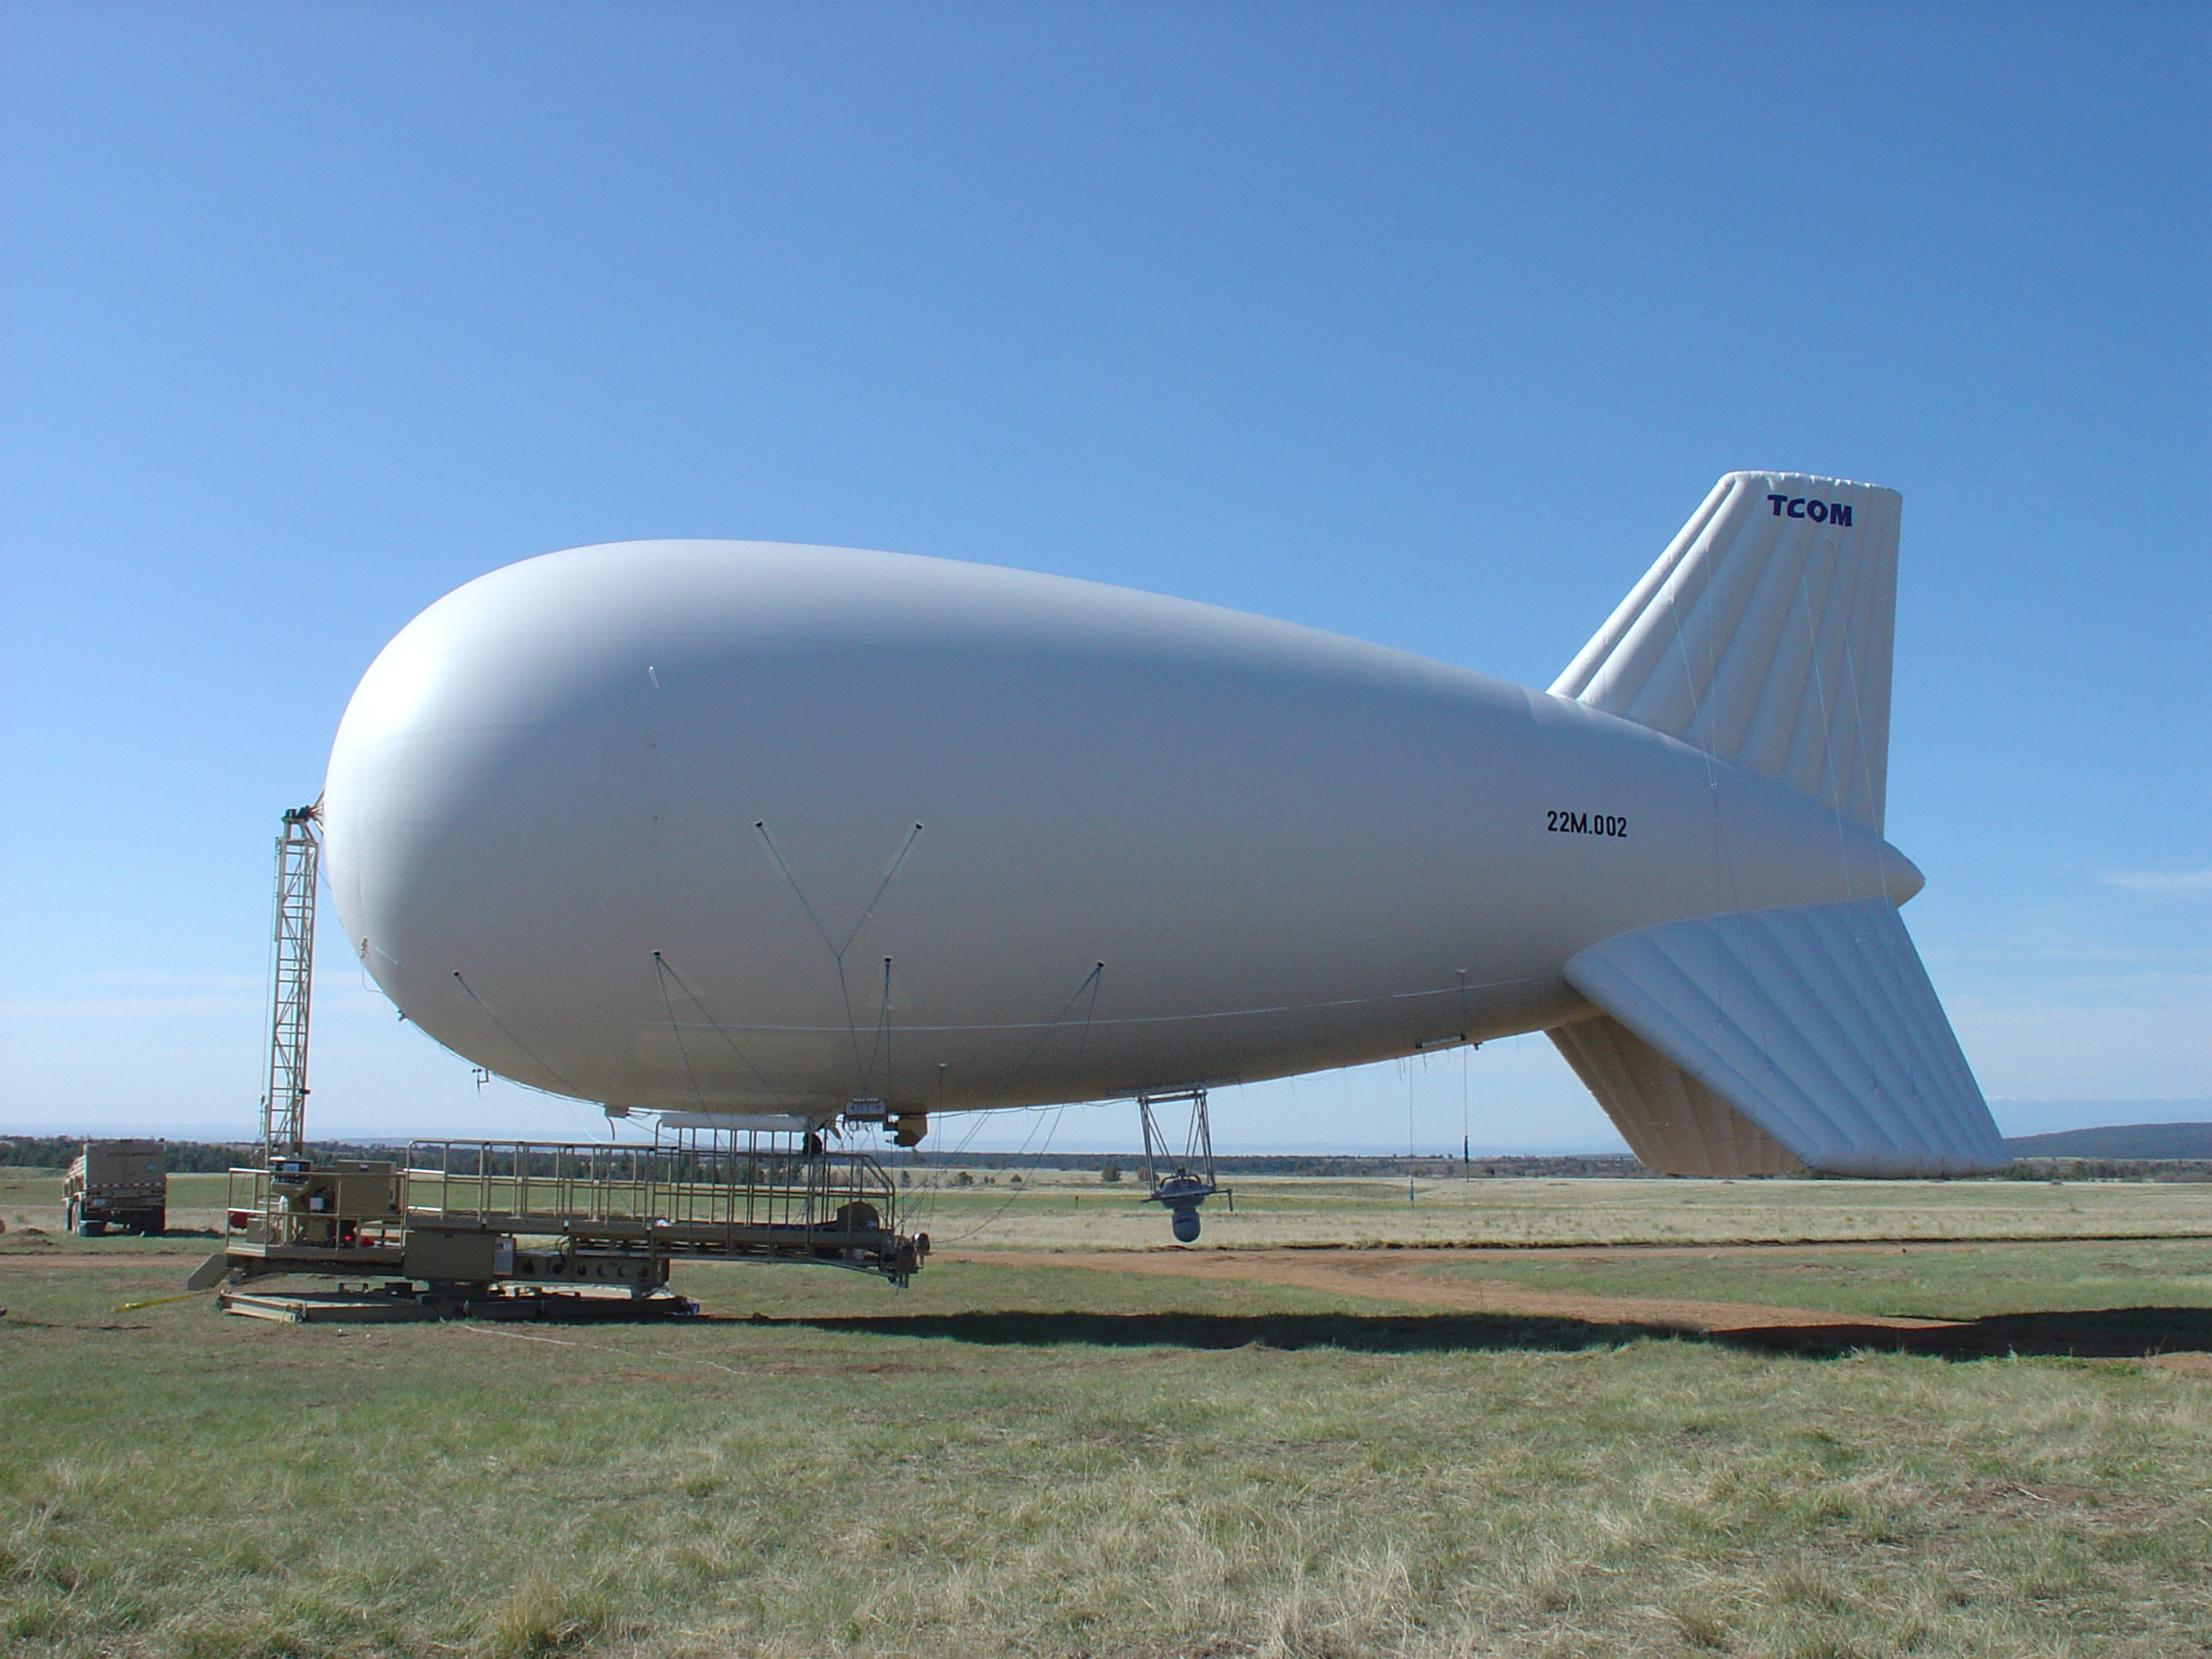 Persistent surveillance and threat detection systems, like those developed by Lockheed Martin and TCOM (pictured here), have proven especially effective in identifying improvised explosive devices, tracking insurgent movements and monitoring other suspicious activity. The companies are subcontractors to Bravura, who will manage the U.S. Army's aerostats under a new U.S. Army contract called Persistent Surveillance Systems - Tethered. Photo courtesy TCOM.